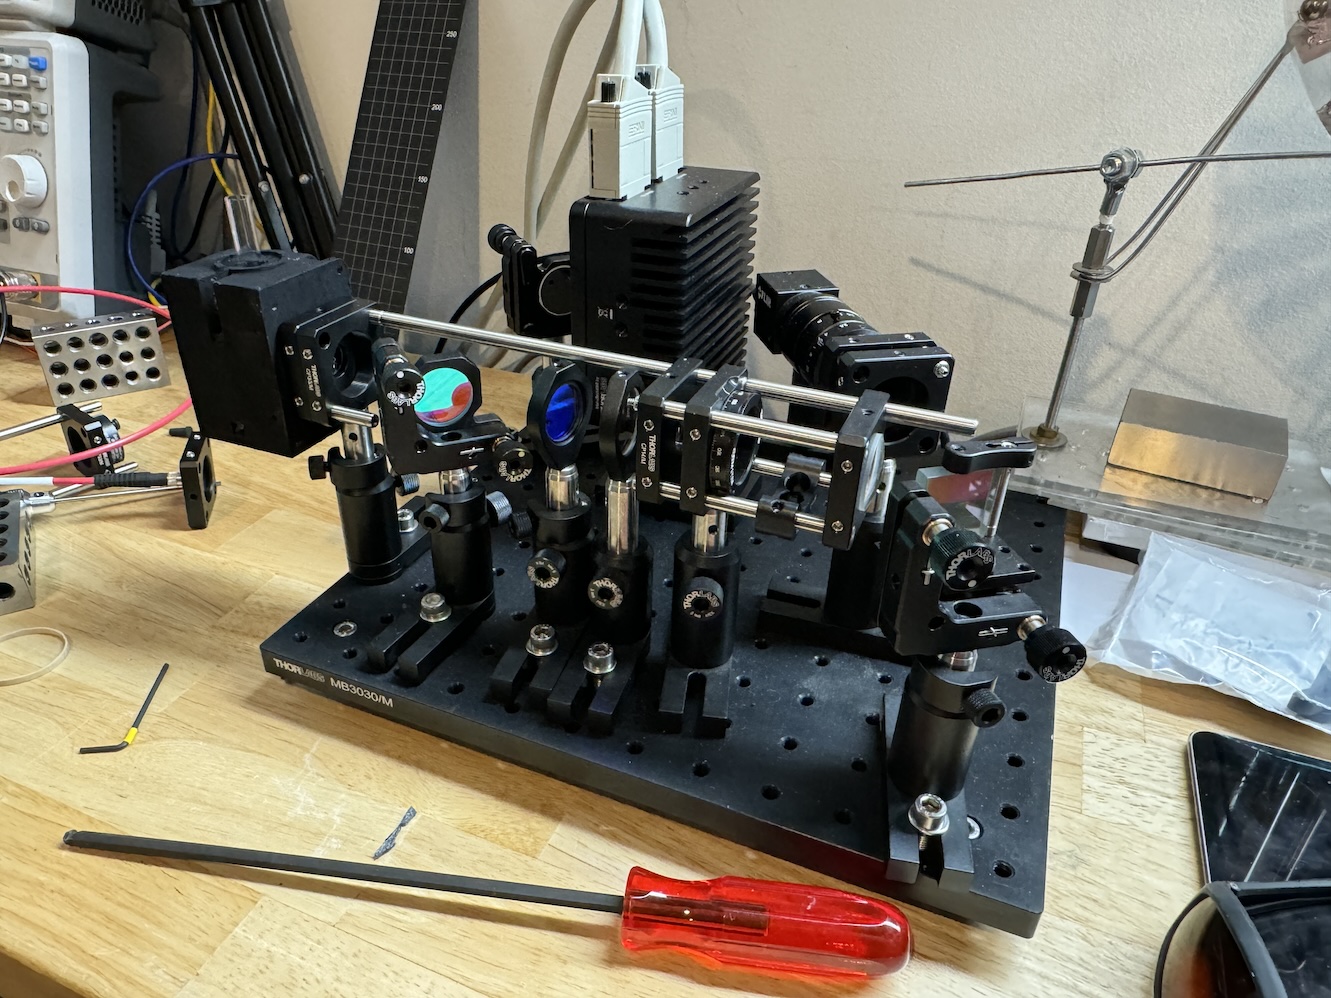 Raman spectrometer (uncovered)